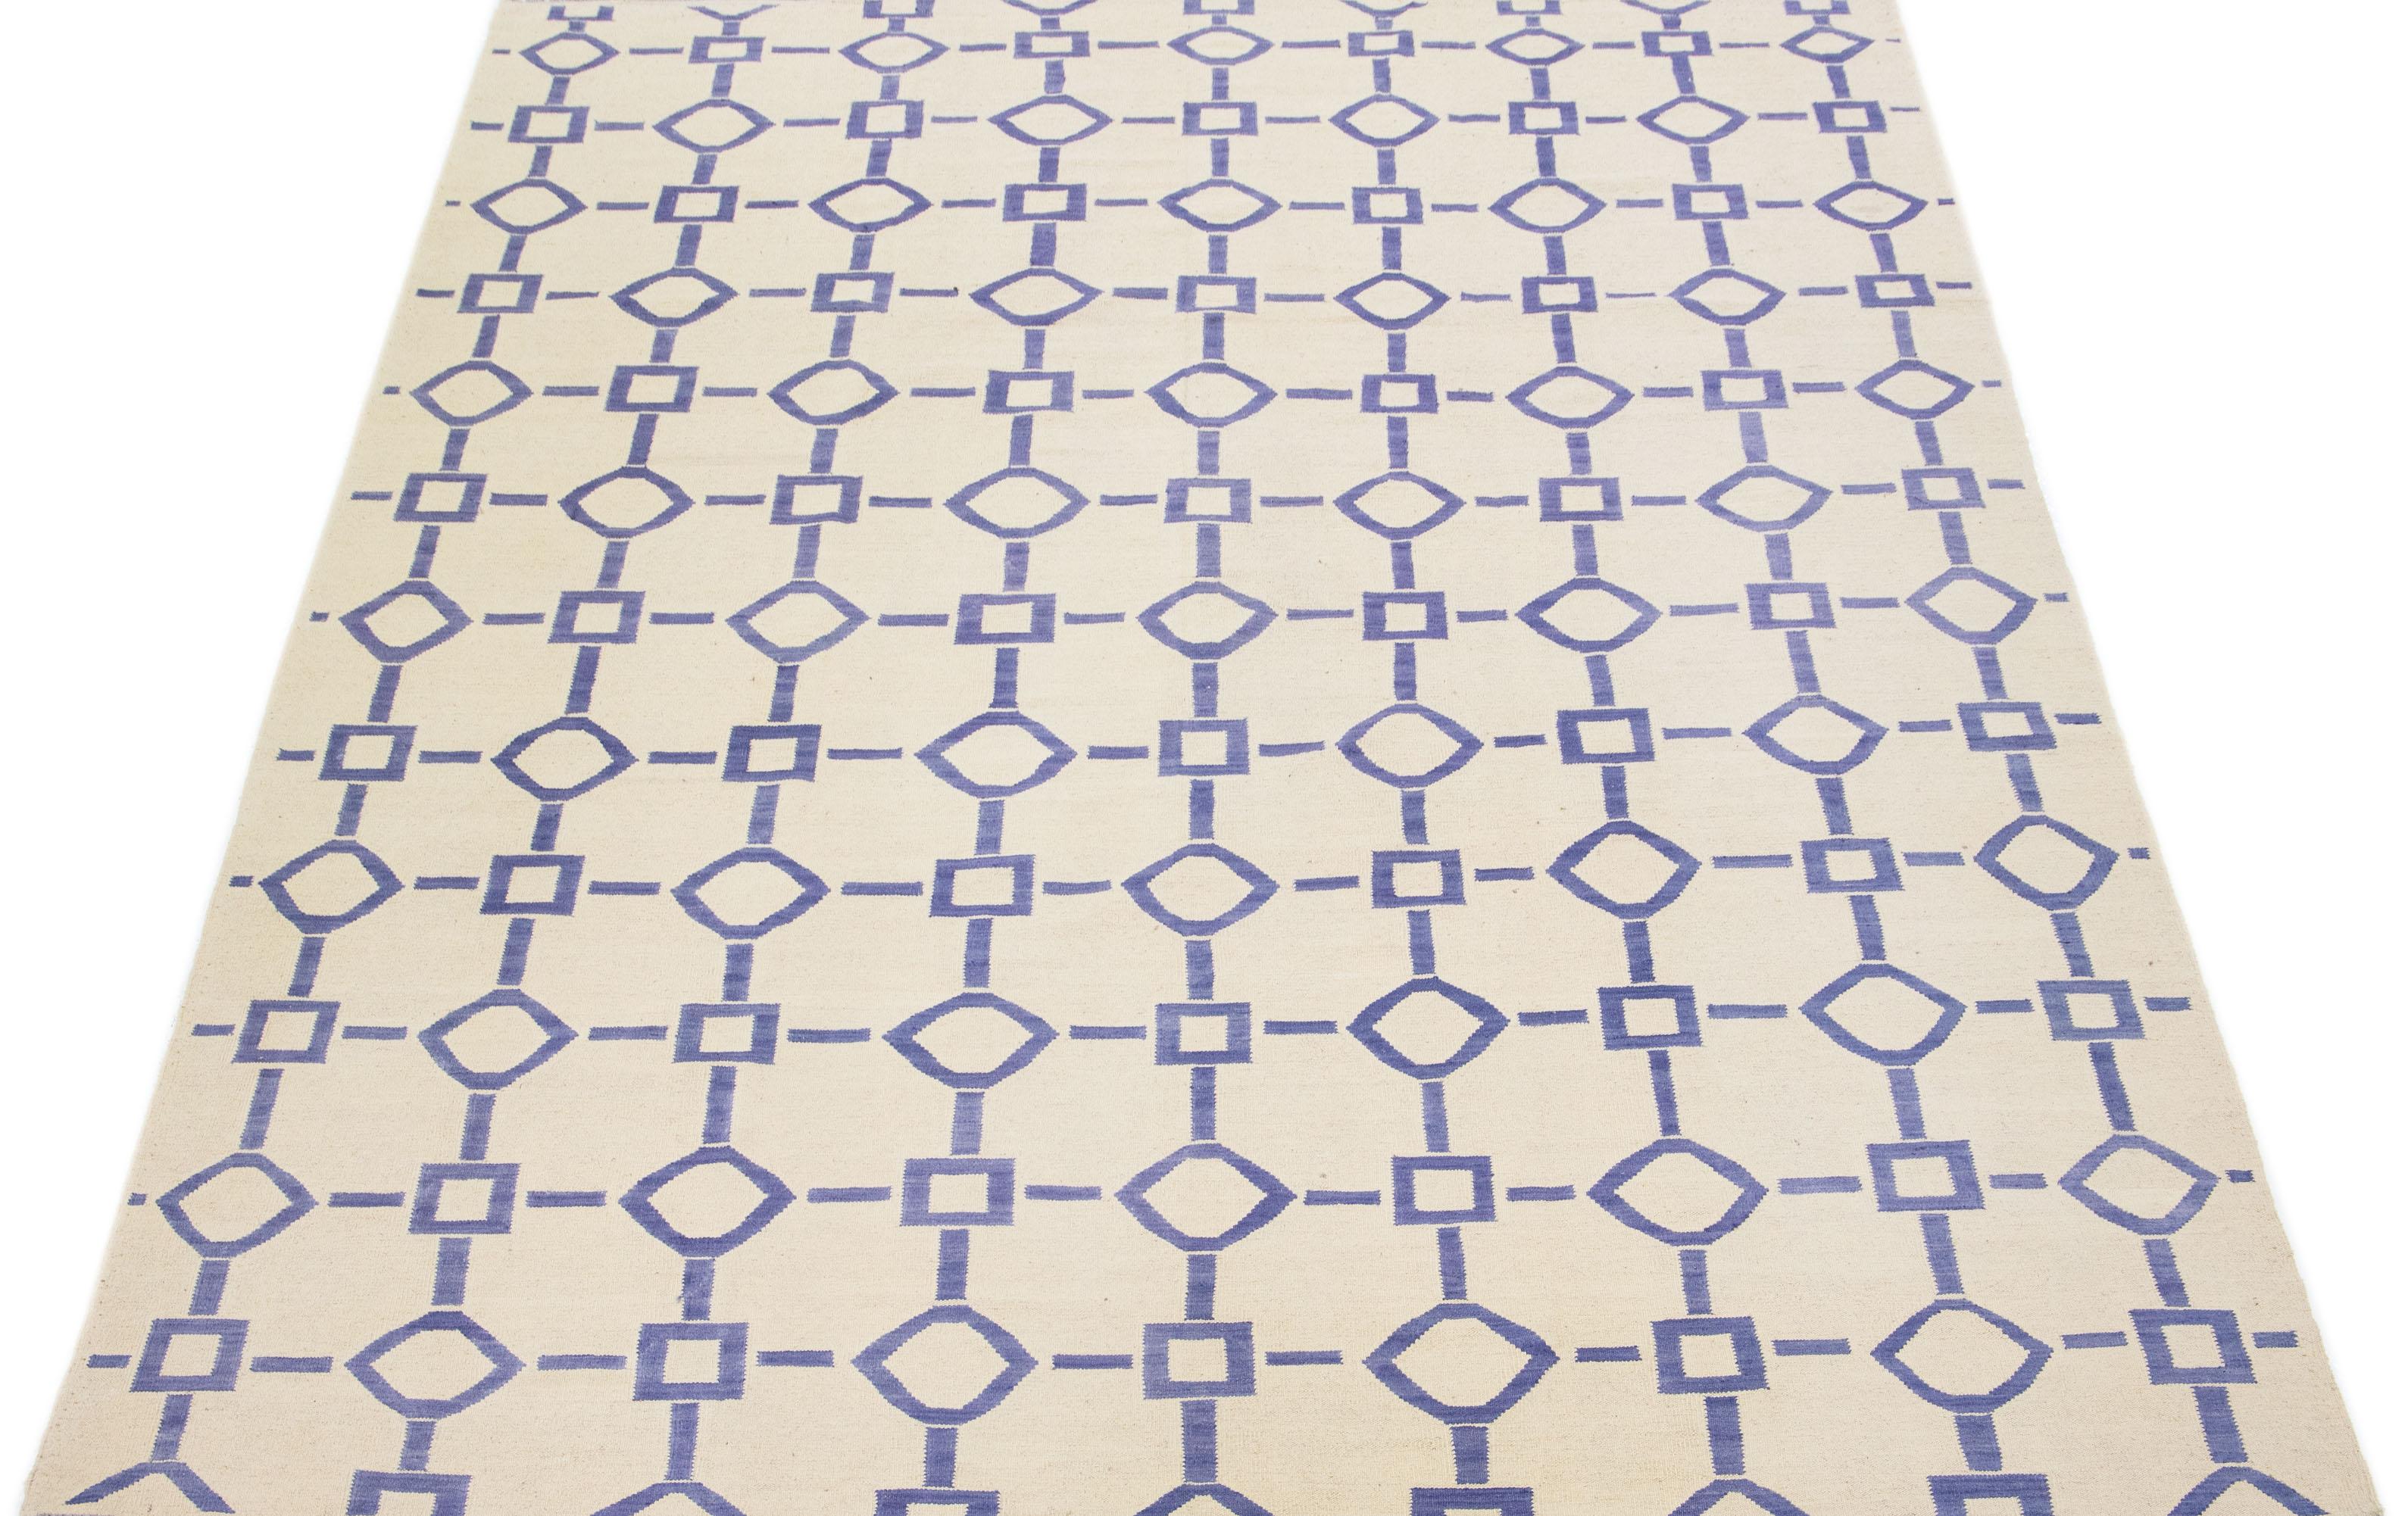 This modern Kilim rug exudes elegance with its finely woven flat-weave wool, presented in a captivating ivory hue complemented by a stunning geometric pattern with accents of blue.

This rug measures 9' x 12'2